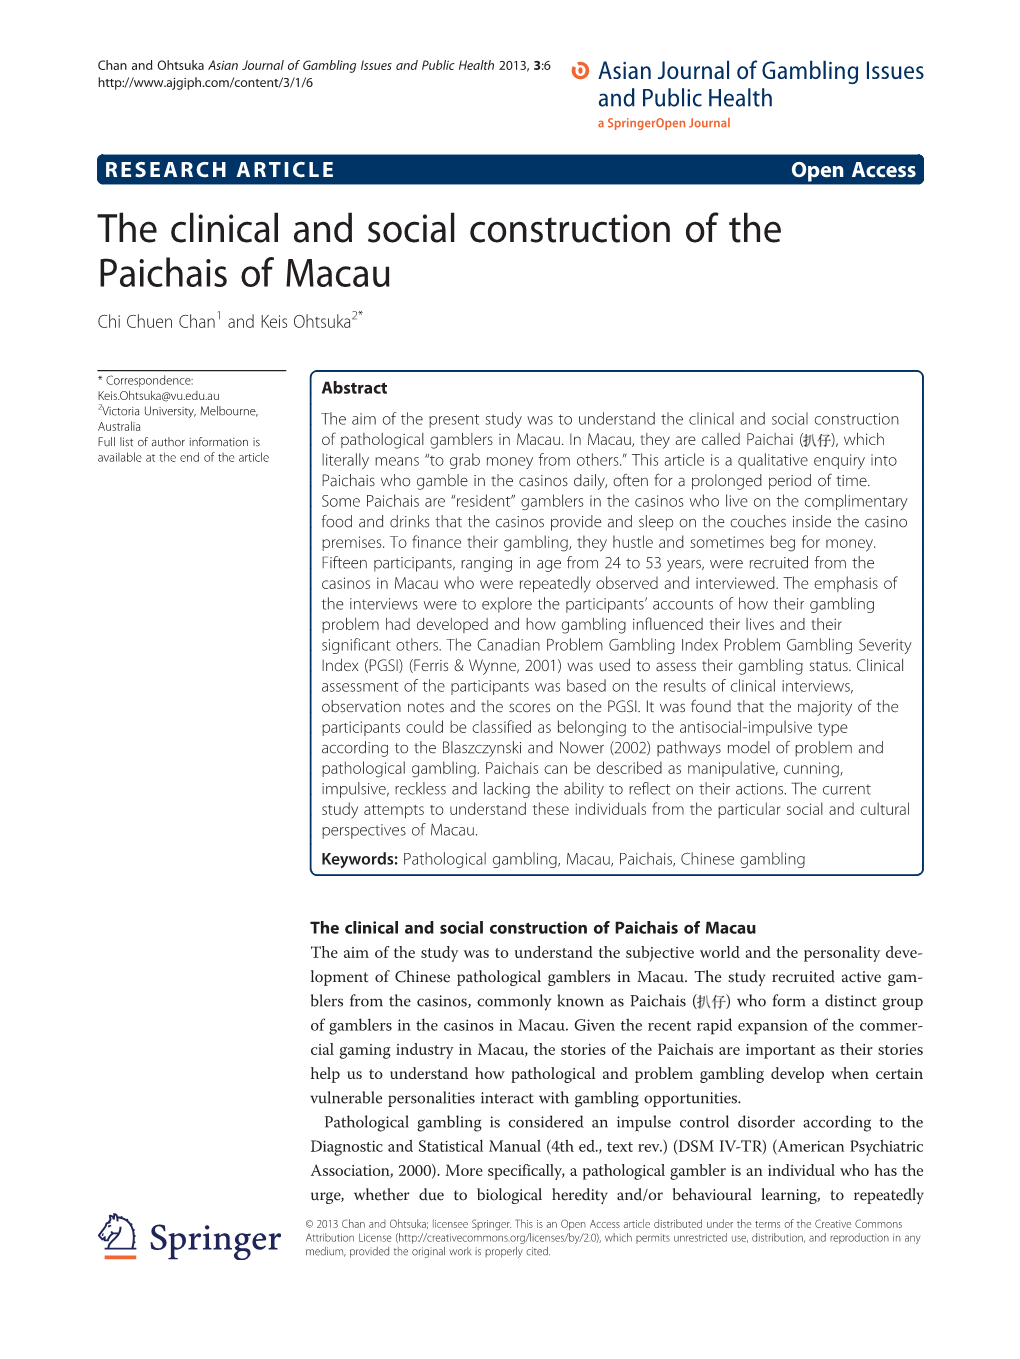 The Clinical and Social Construction of the Paichais of Macau Chi Chuen Chan1 and Keis Ohtsuka2*